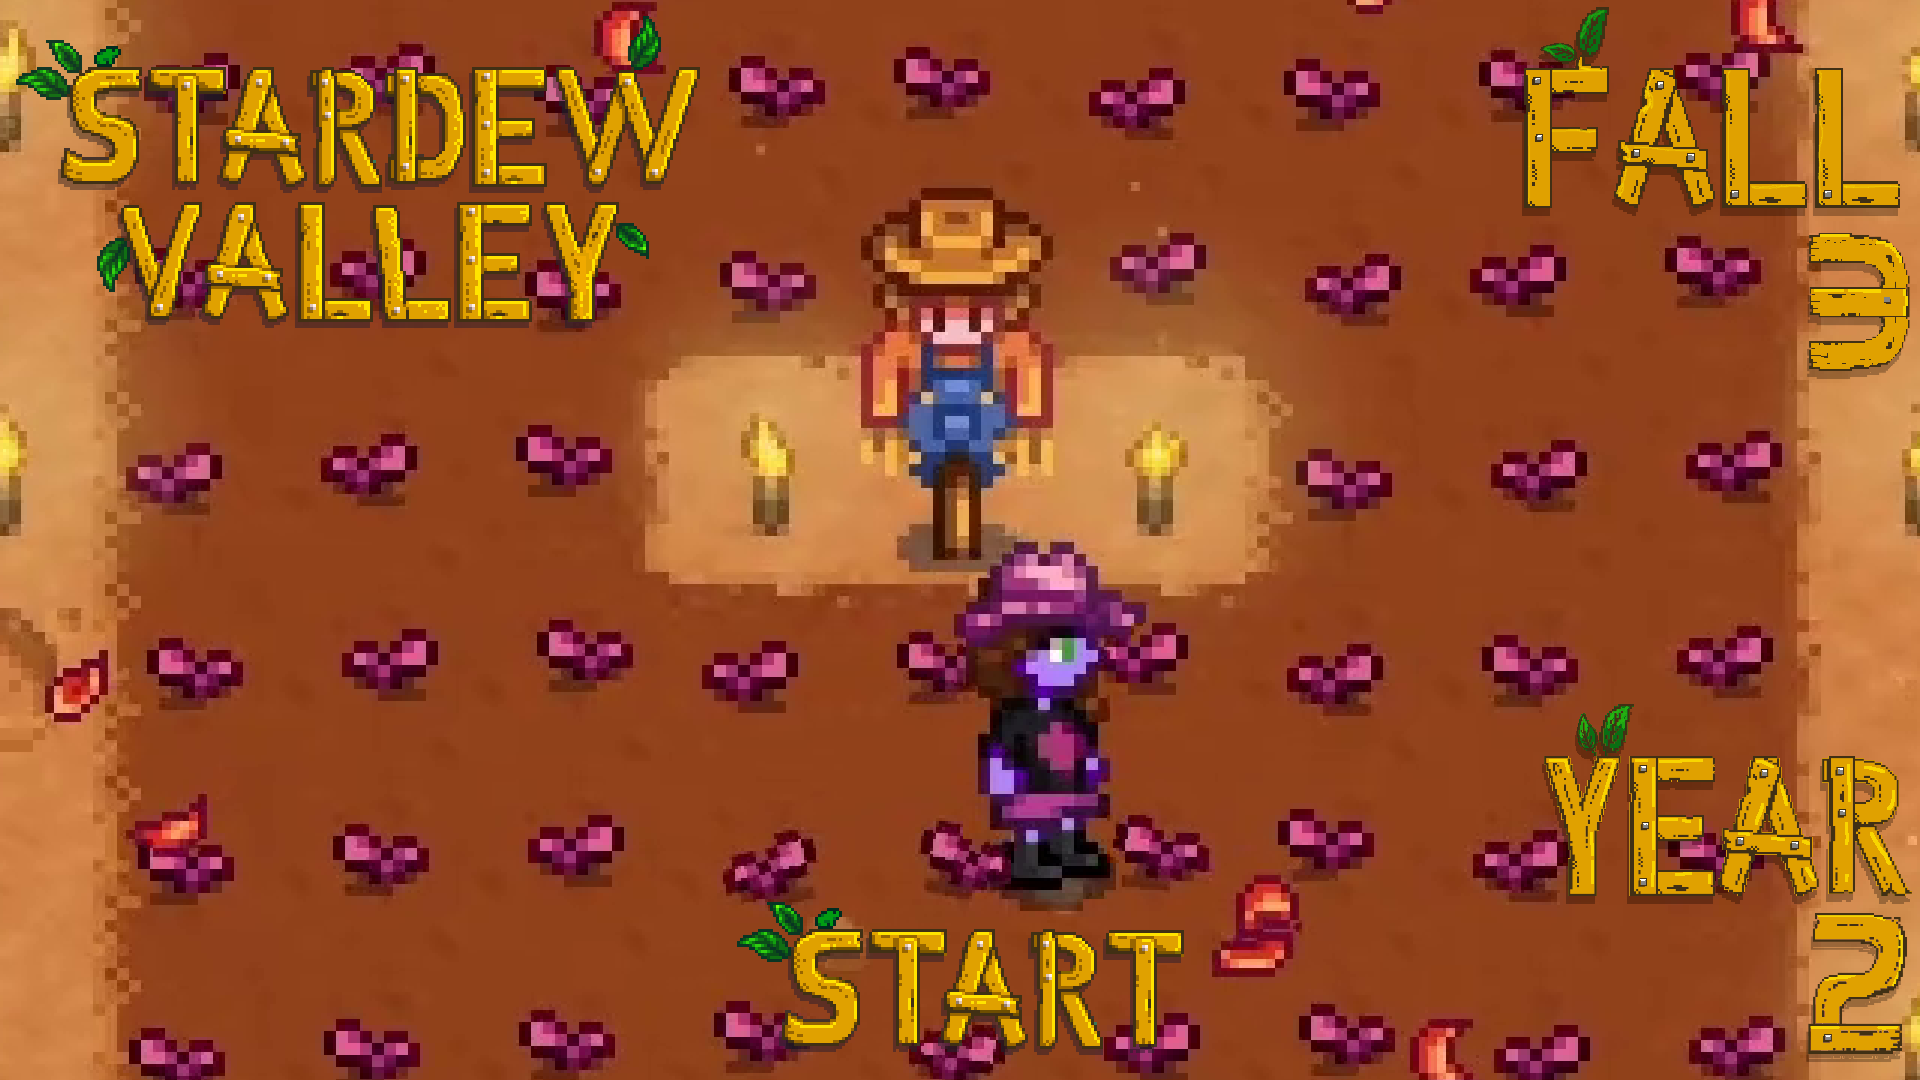 The Morning After – Stardew Valley, Fall 3, Year 2, Start